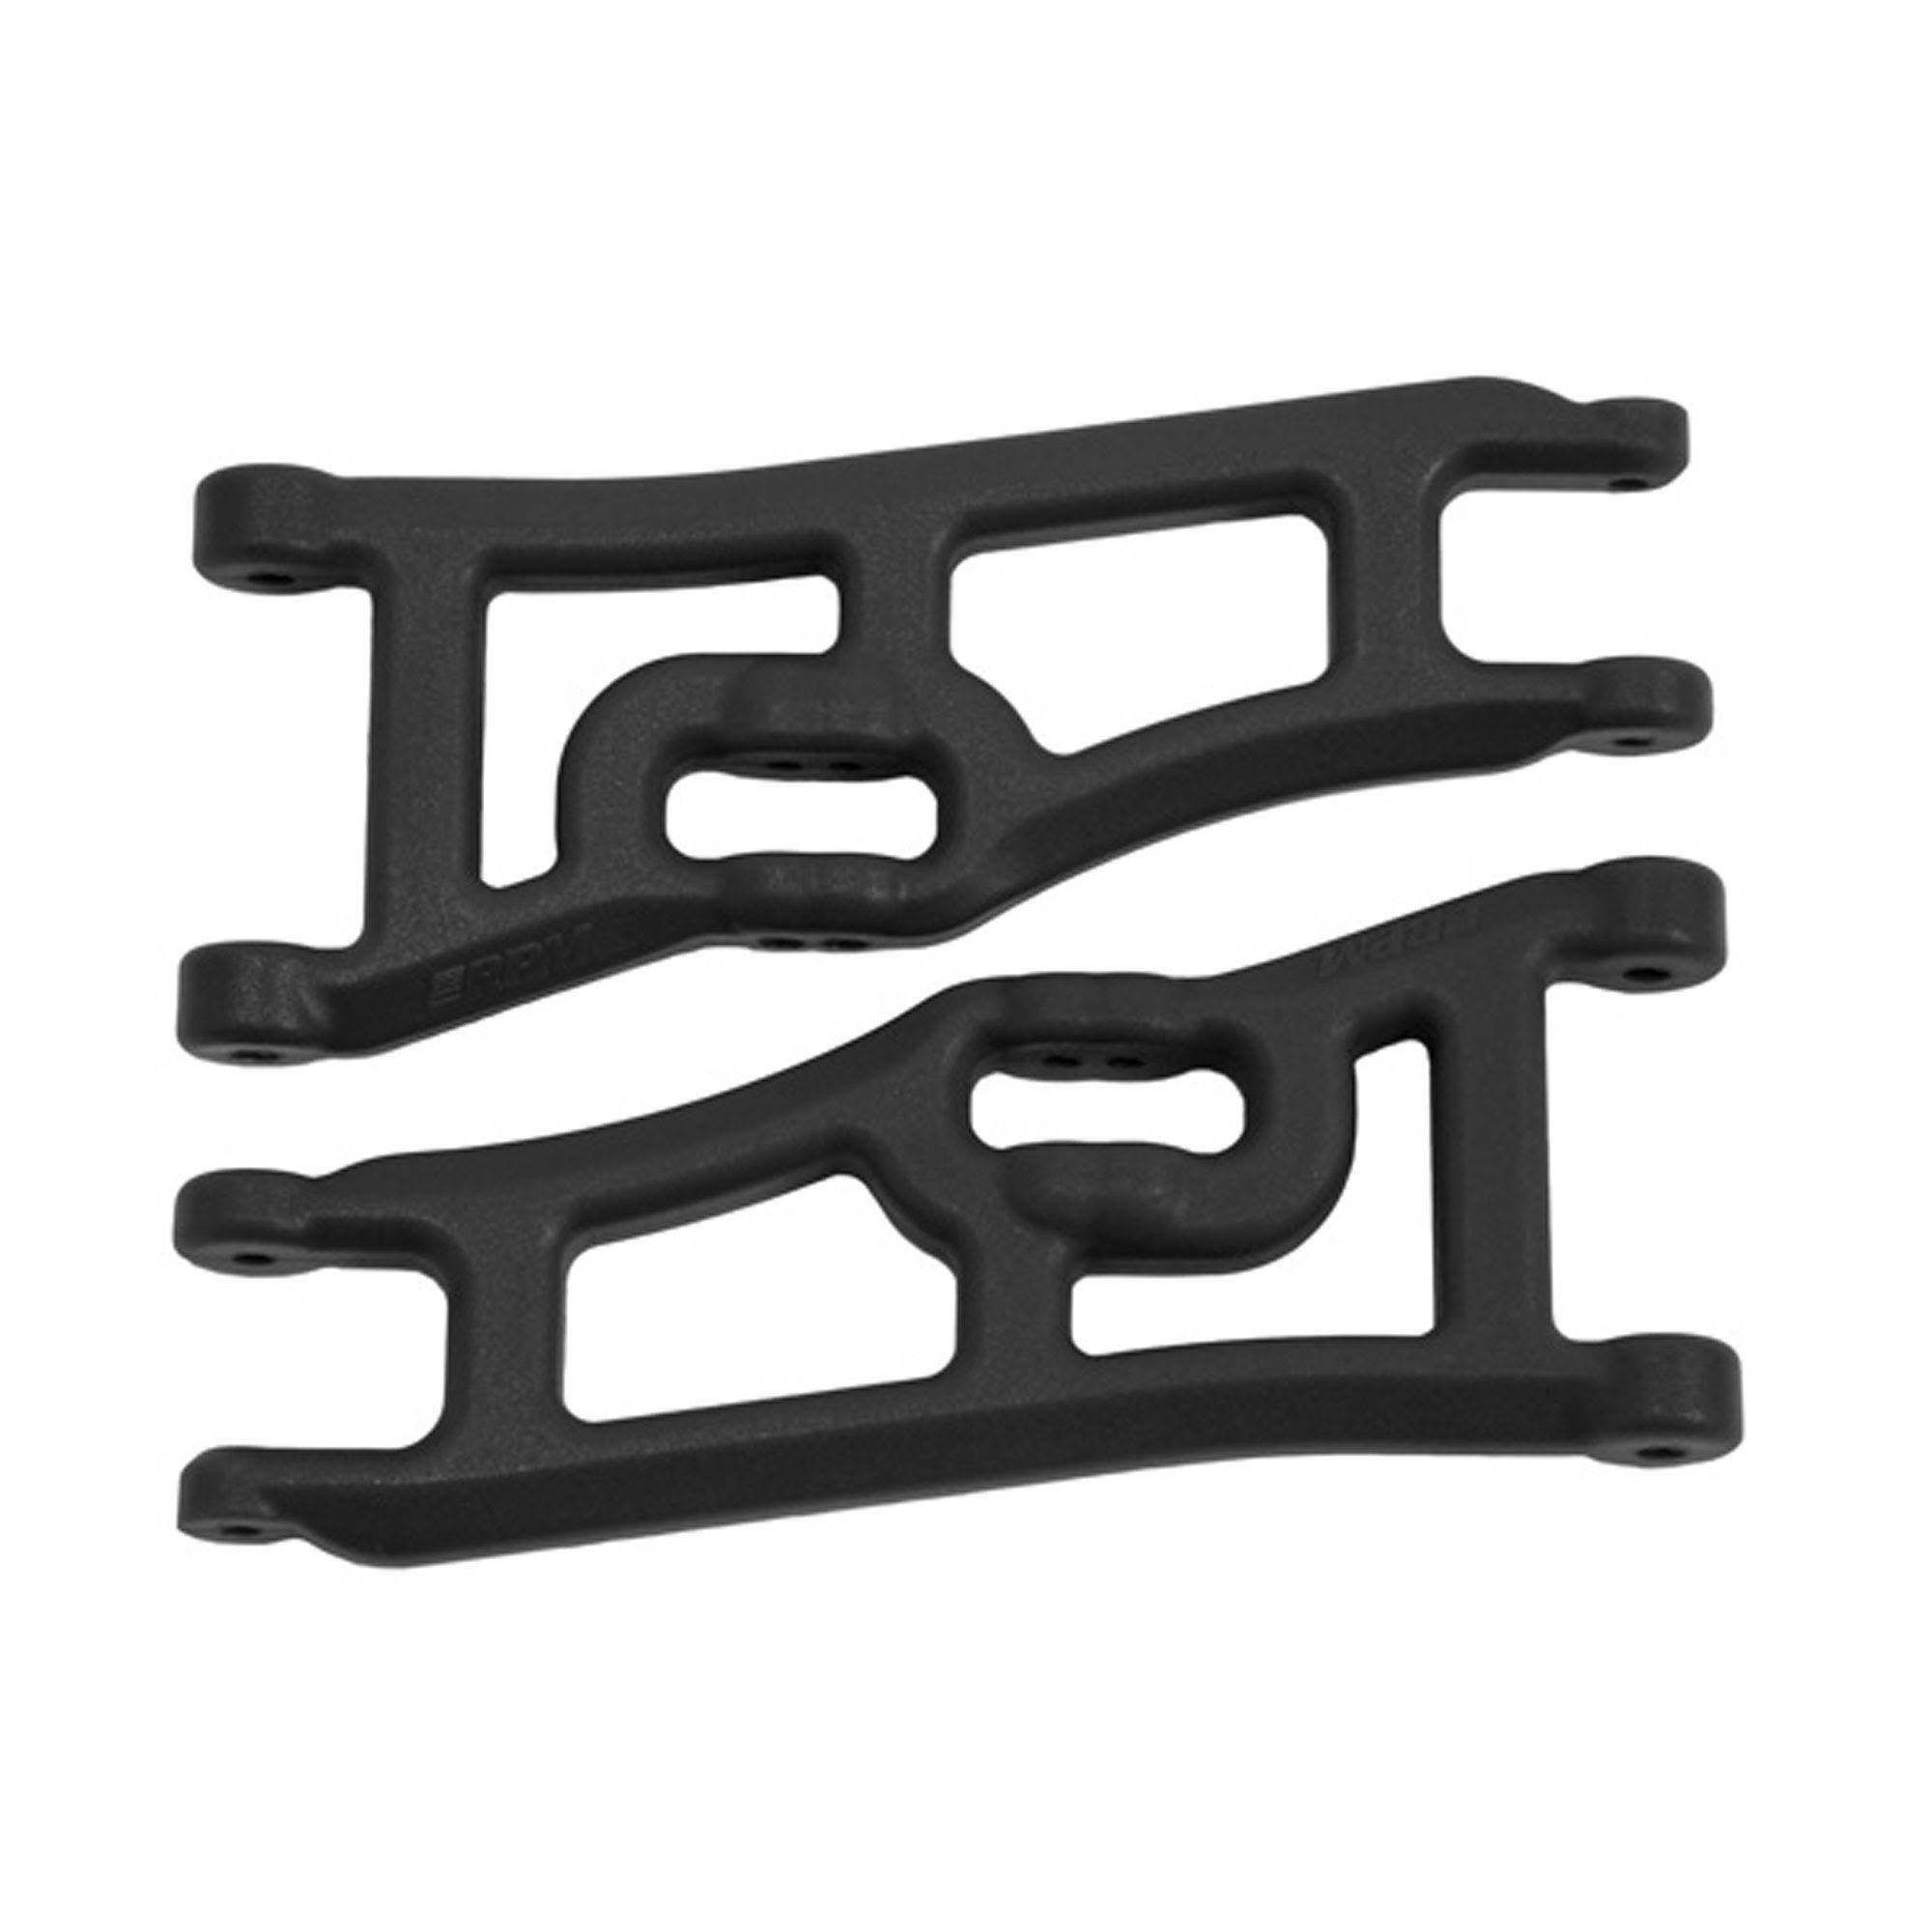 RPM Wide Front A-Arms for Traxxas E-Rustler & Stampede 2WD - Black